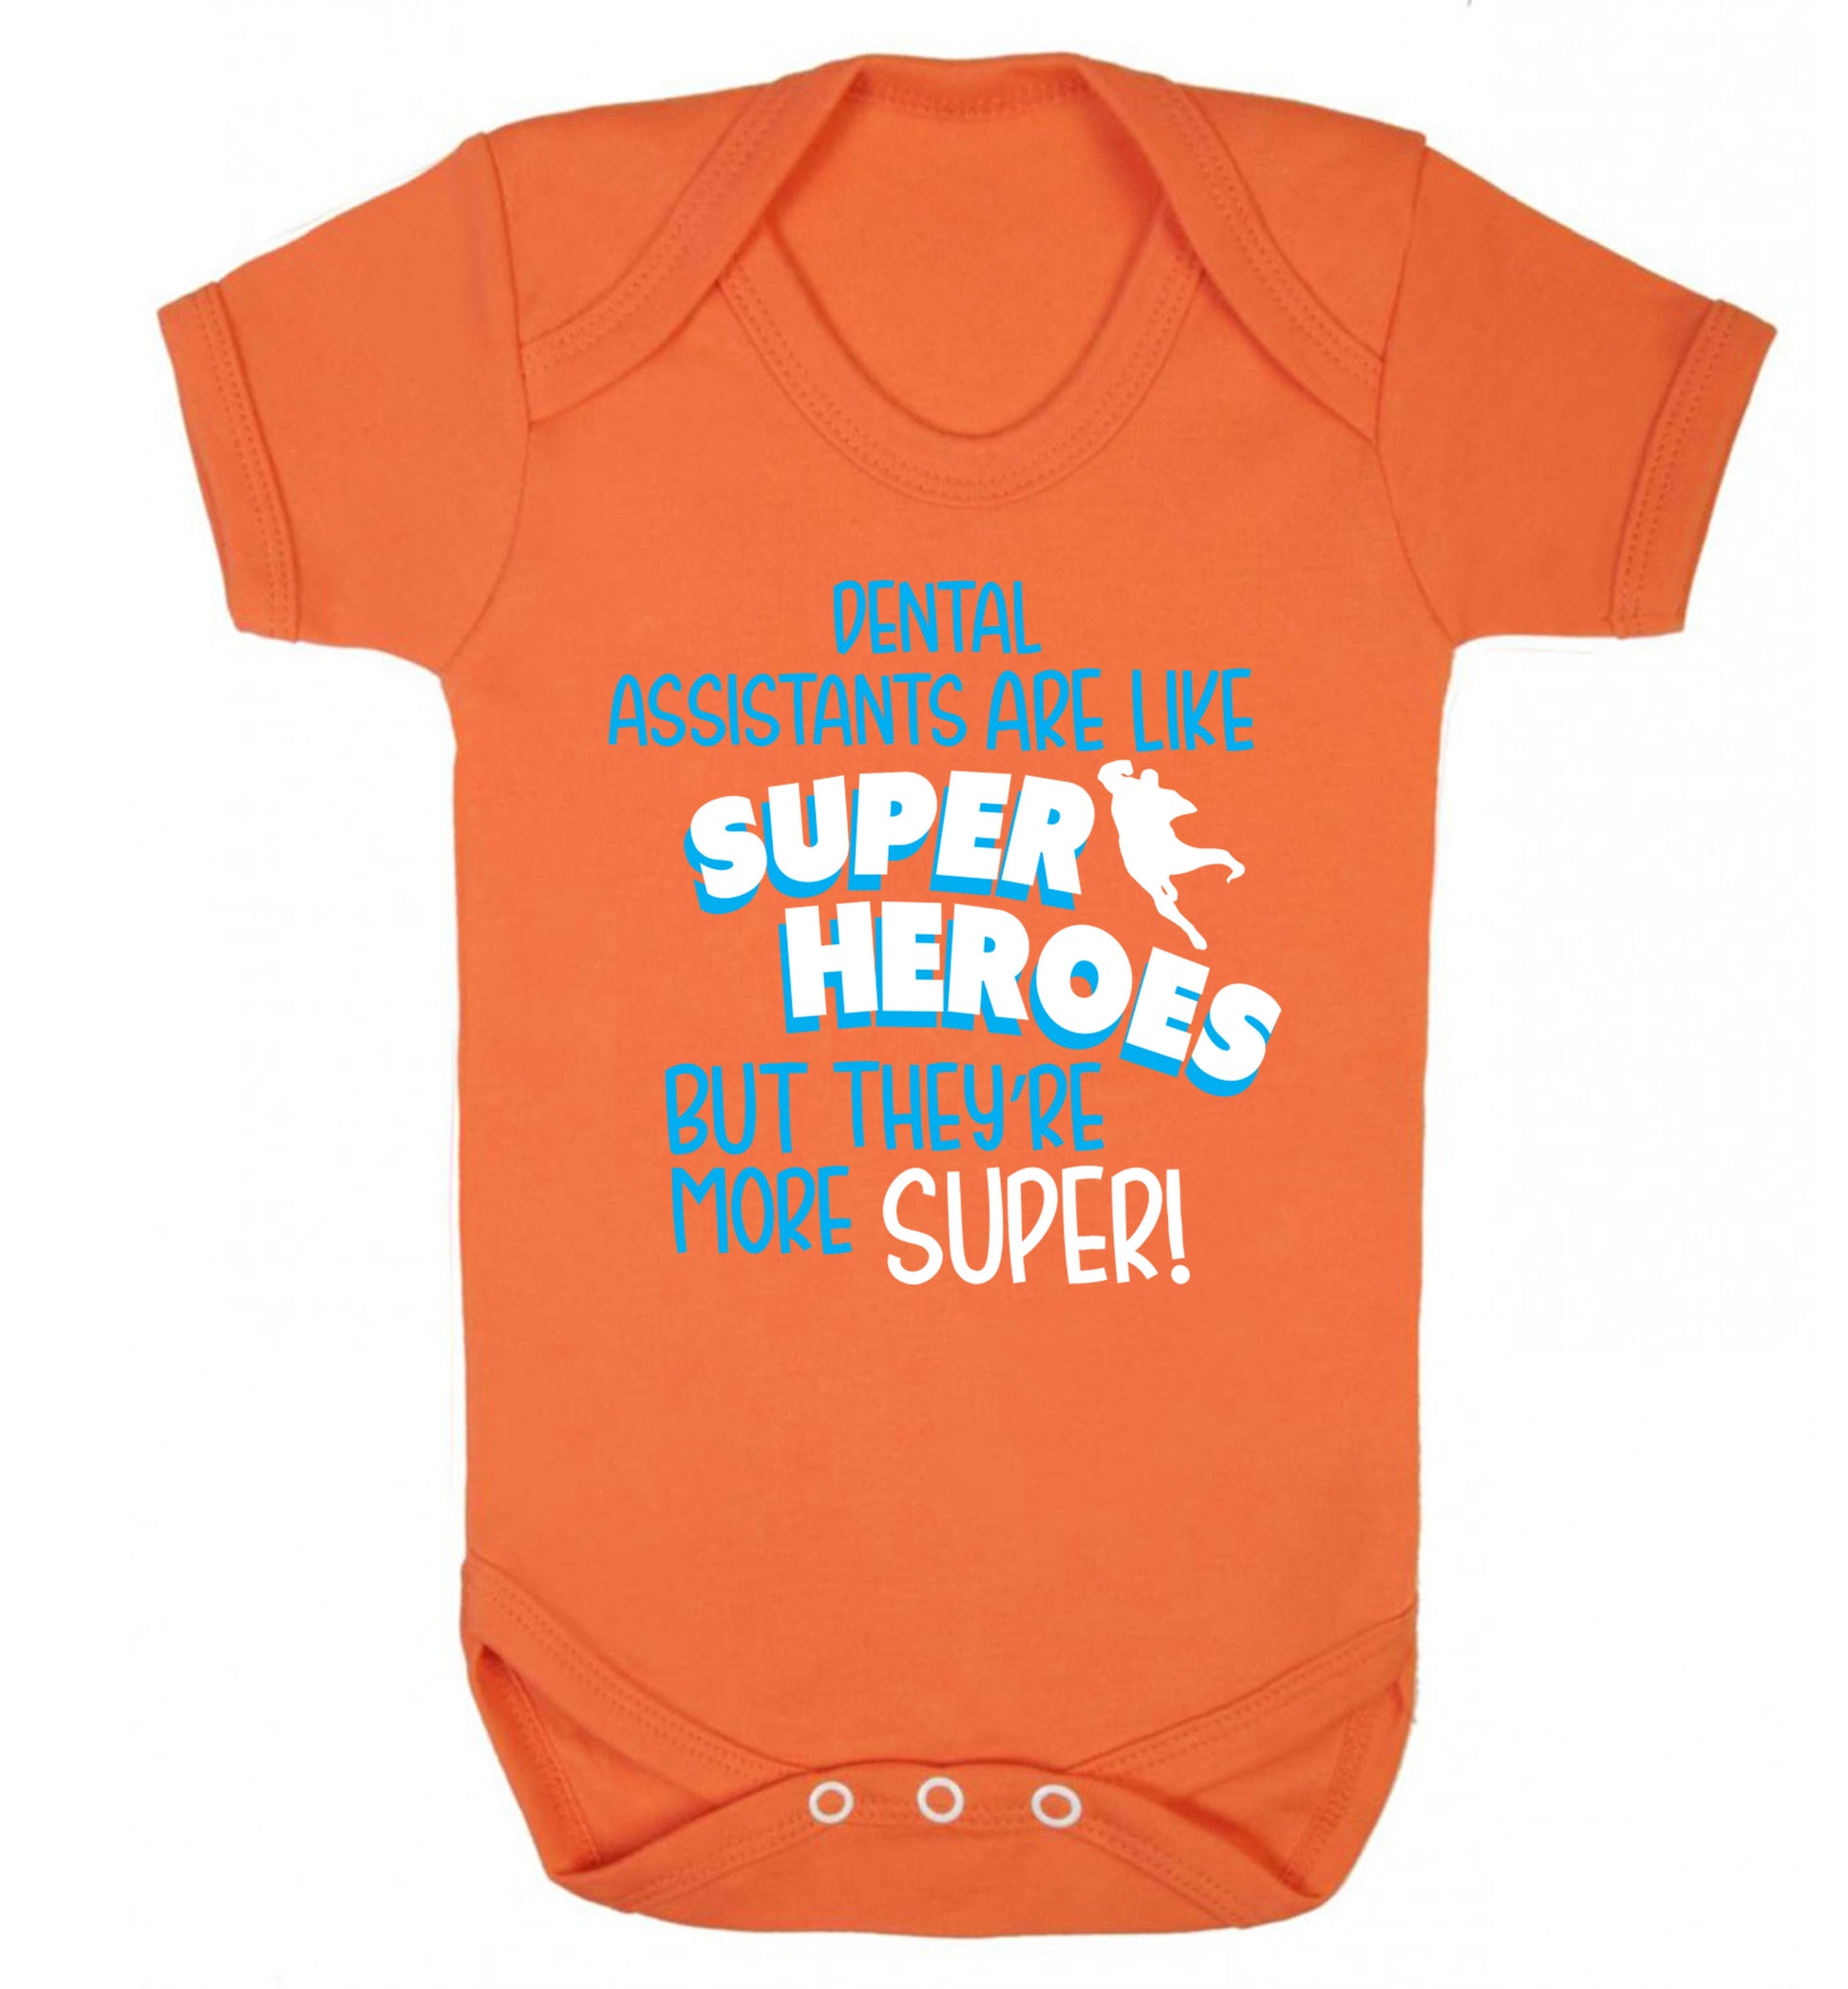 Dental Assistants are like superheros but they're more super Baby Vest orange 18-24 months